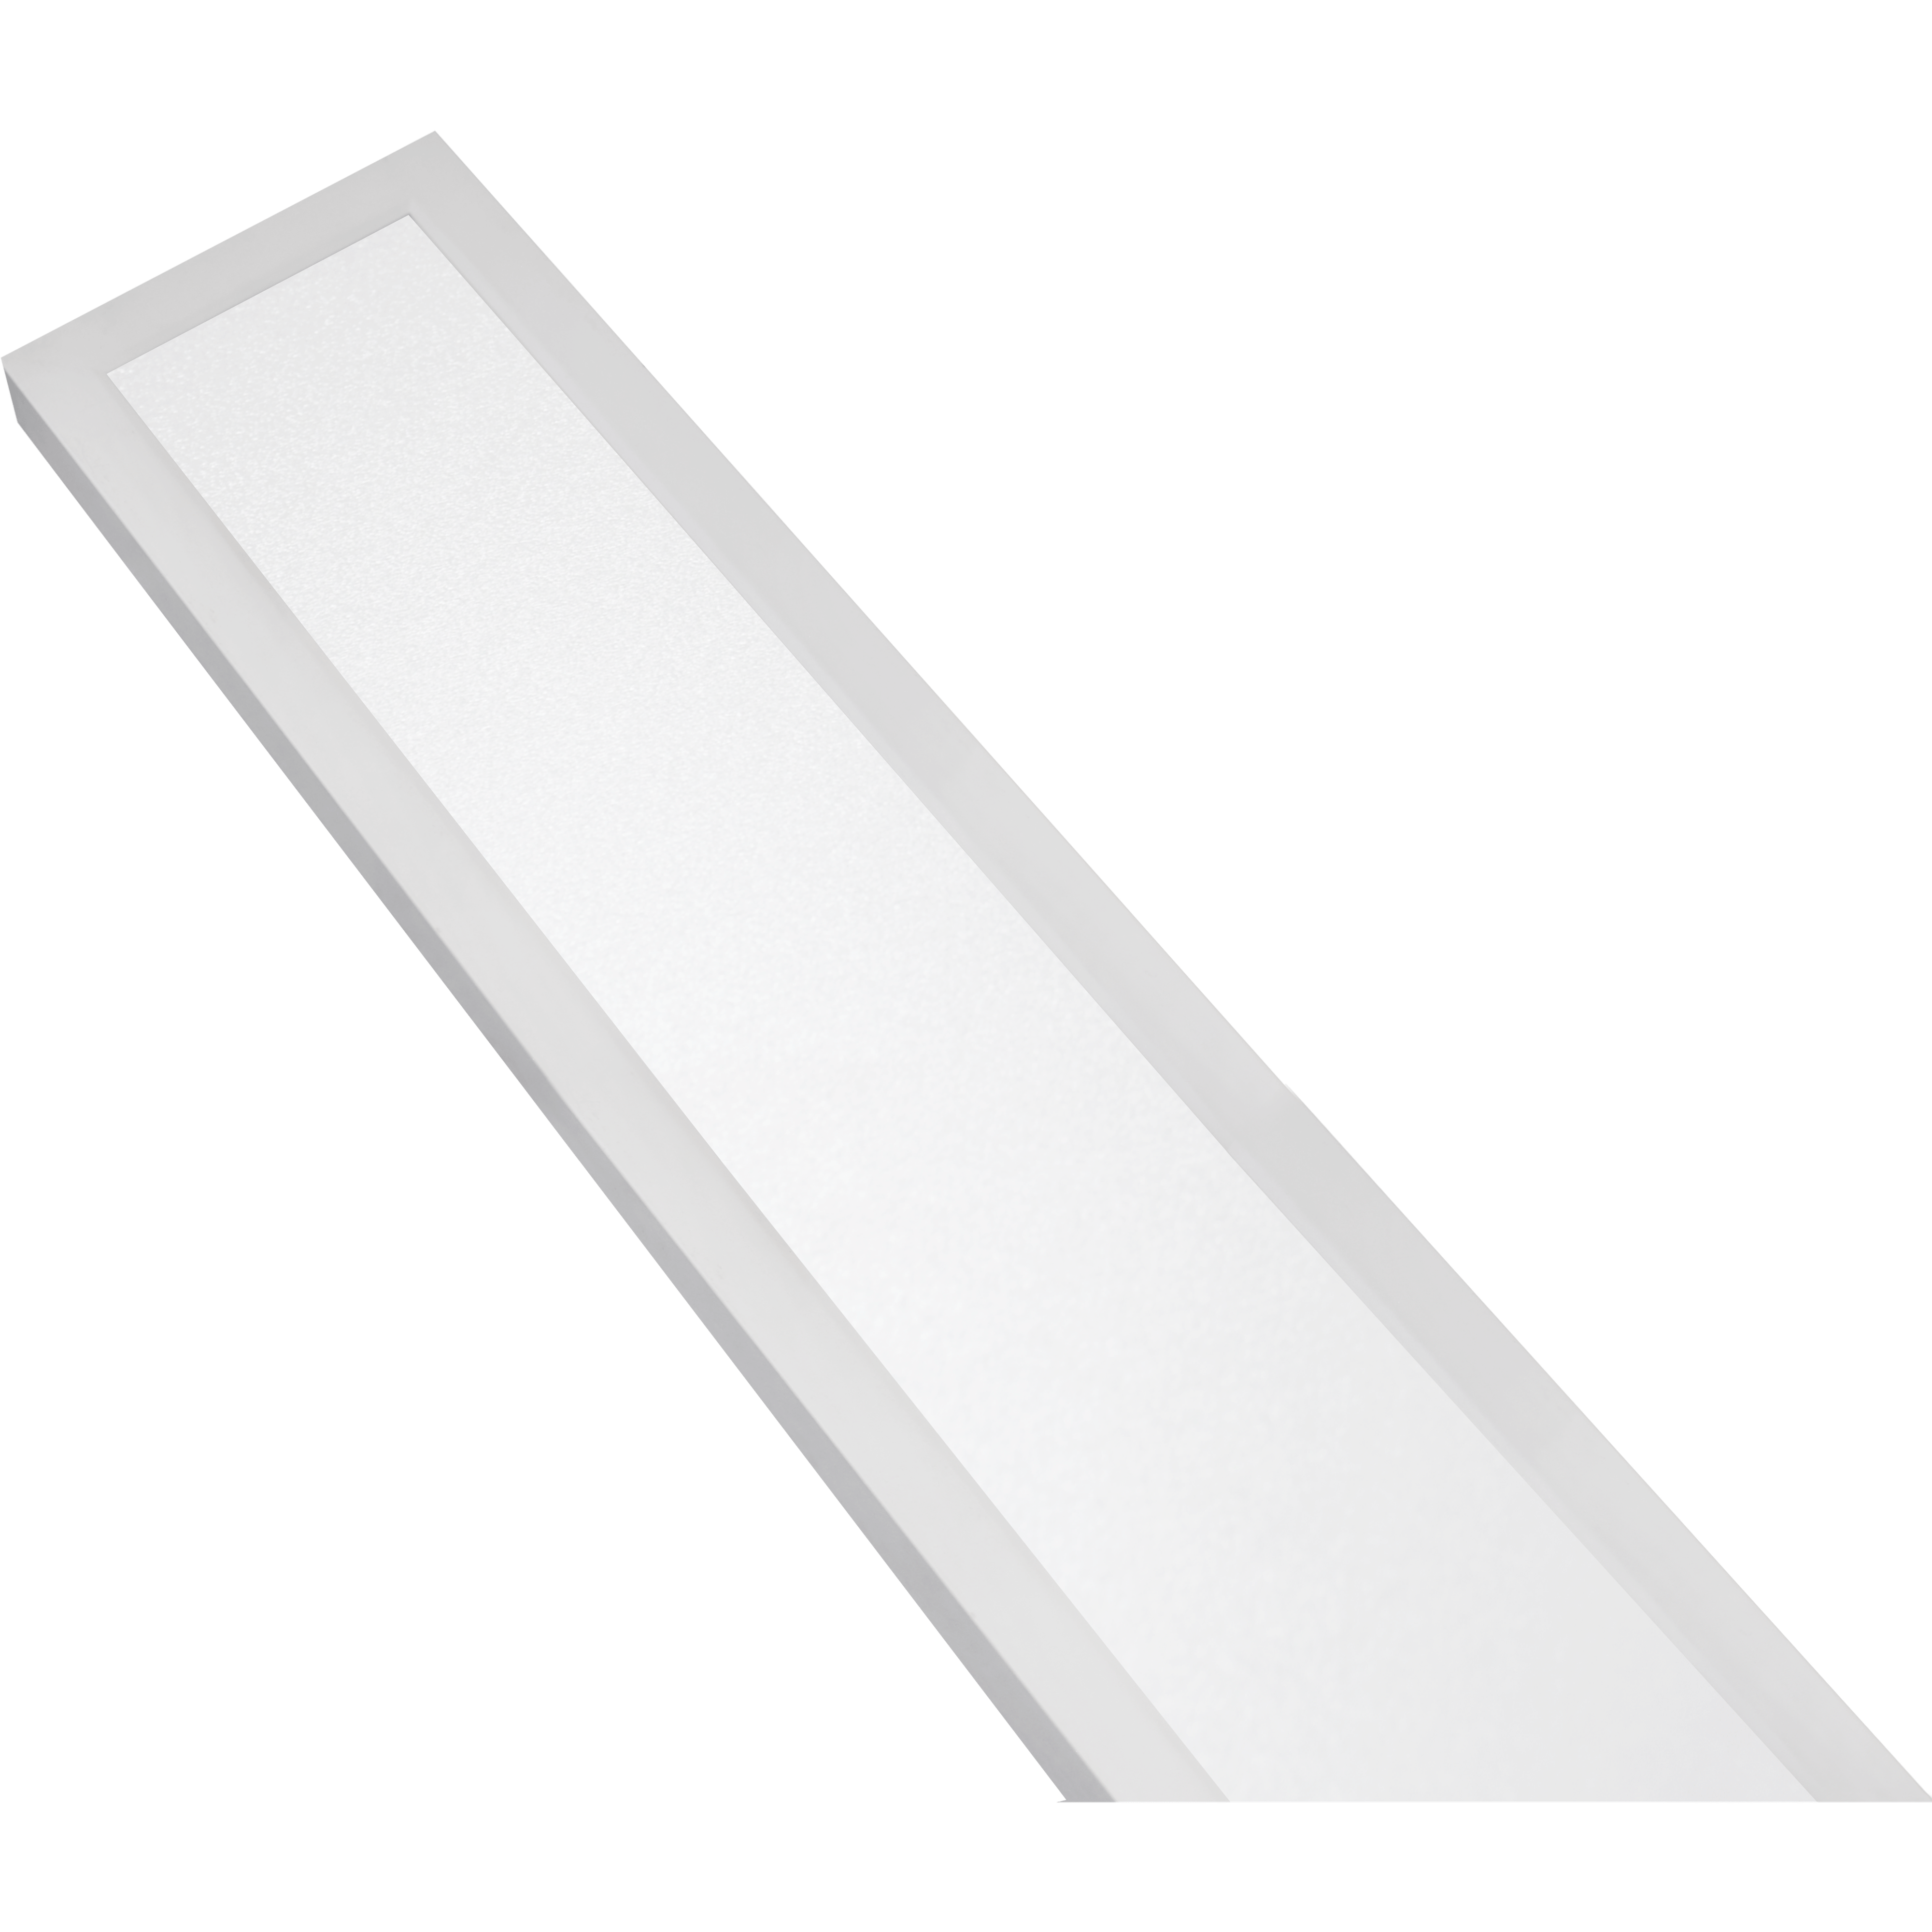 POE Texas Lighting Denton Linear Recessed PoE Lights - 4 in x 8 ft (Recessed)